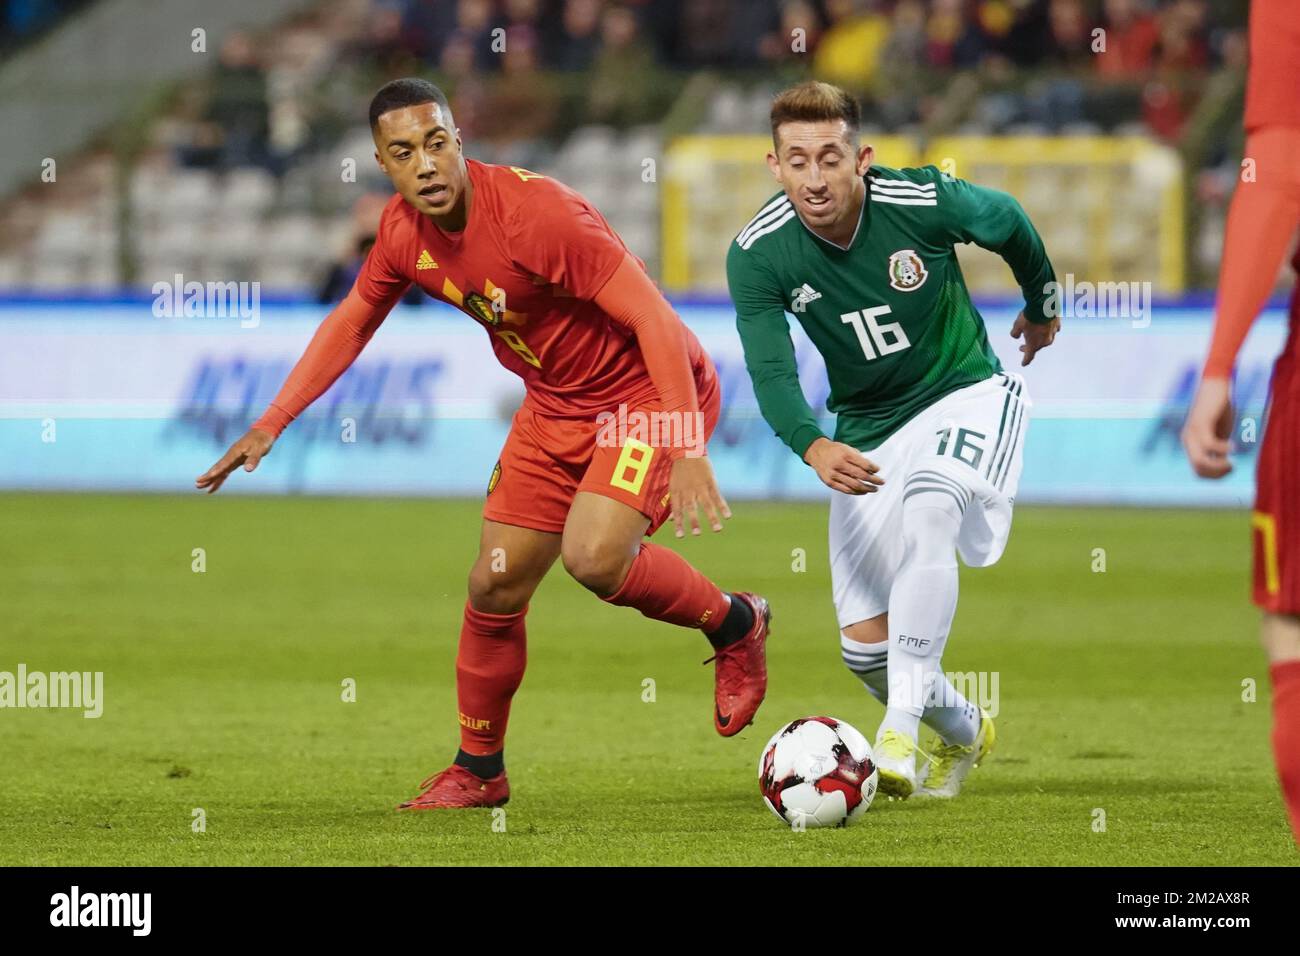 Belgium's Youri Tielemans and Mexico's Hector Herrera fight for the ball during a friendly soccer game between Belgian national team Red Devils and Mexico, Friday 10 November 2017, in Brugge. BELGA PHOTO BRUNO FAHY Stock Photo